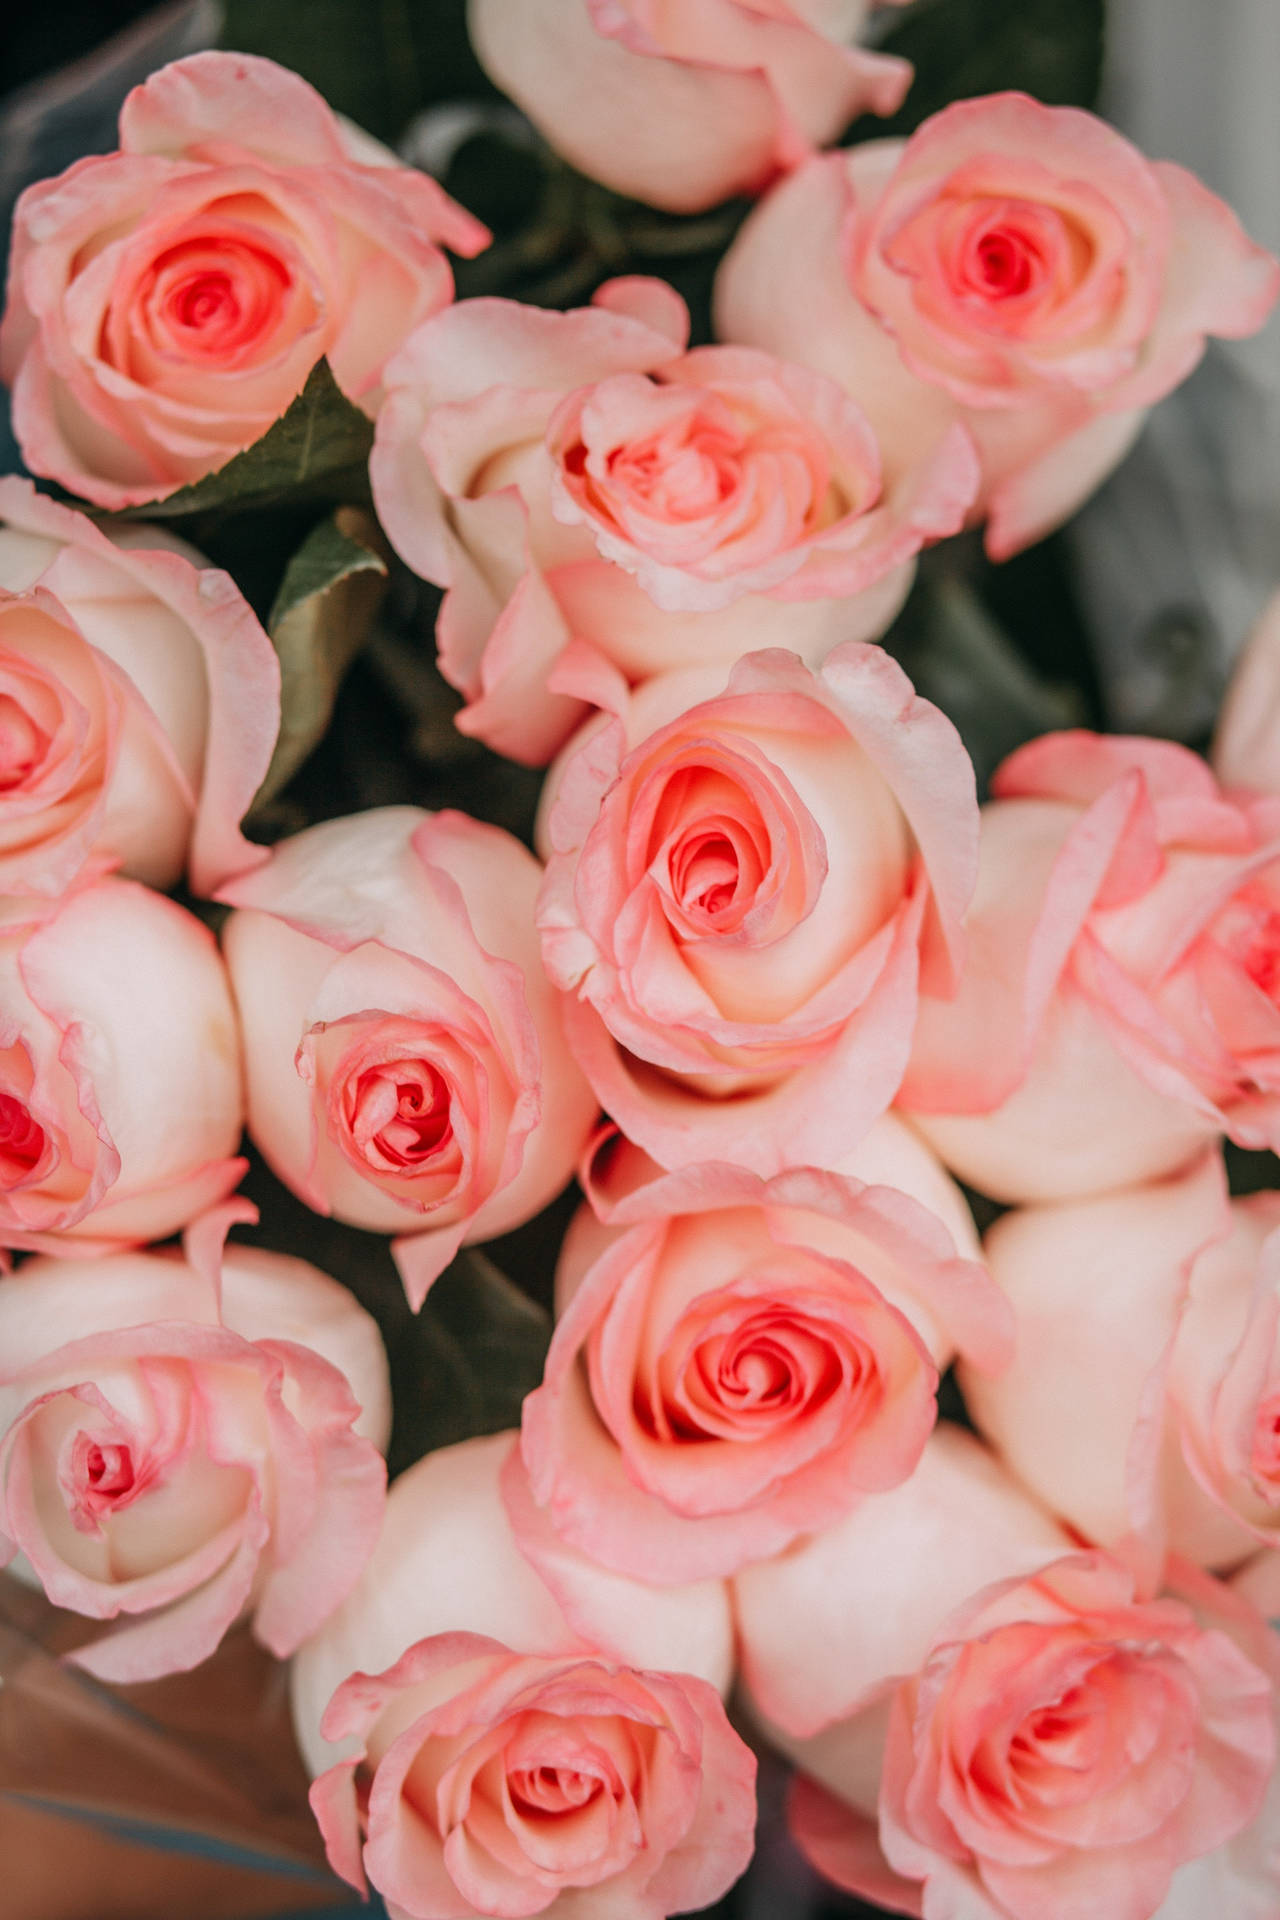 Close-up Pink Rose Aesthetic